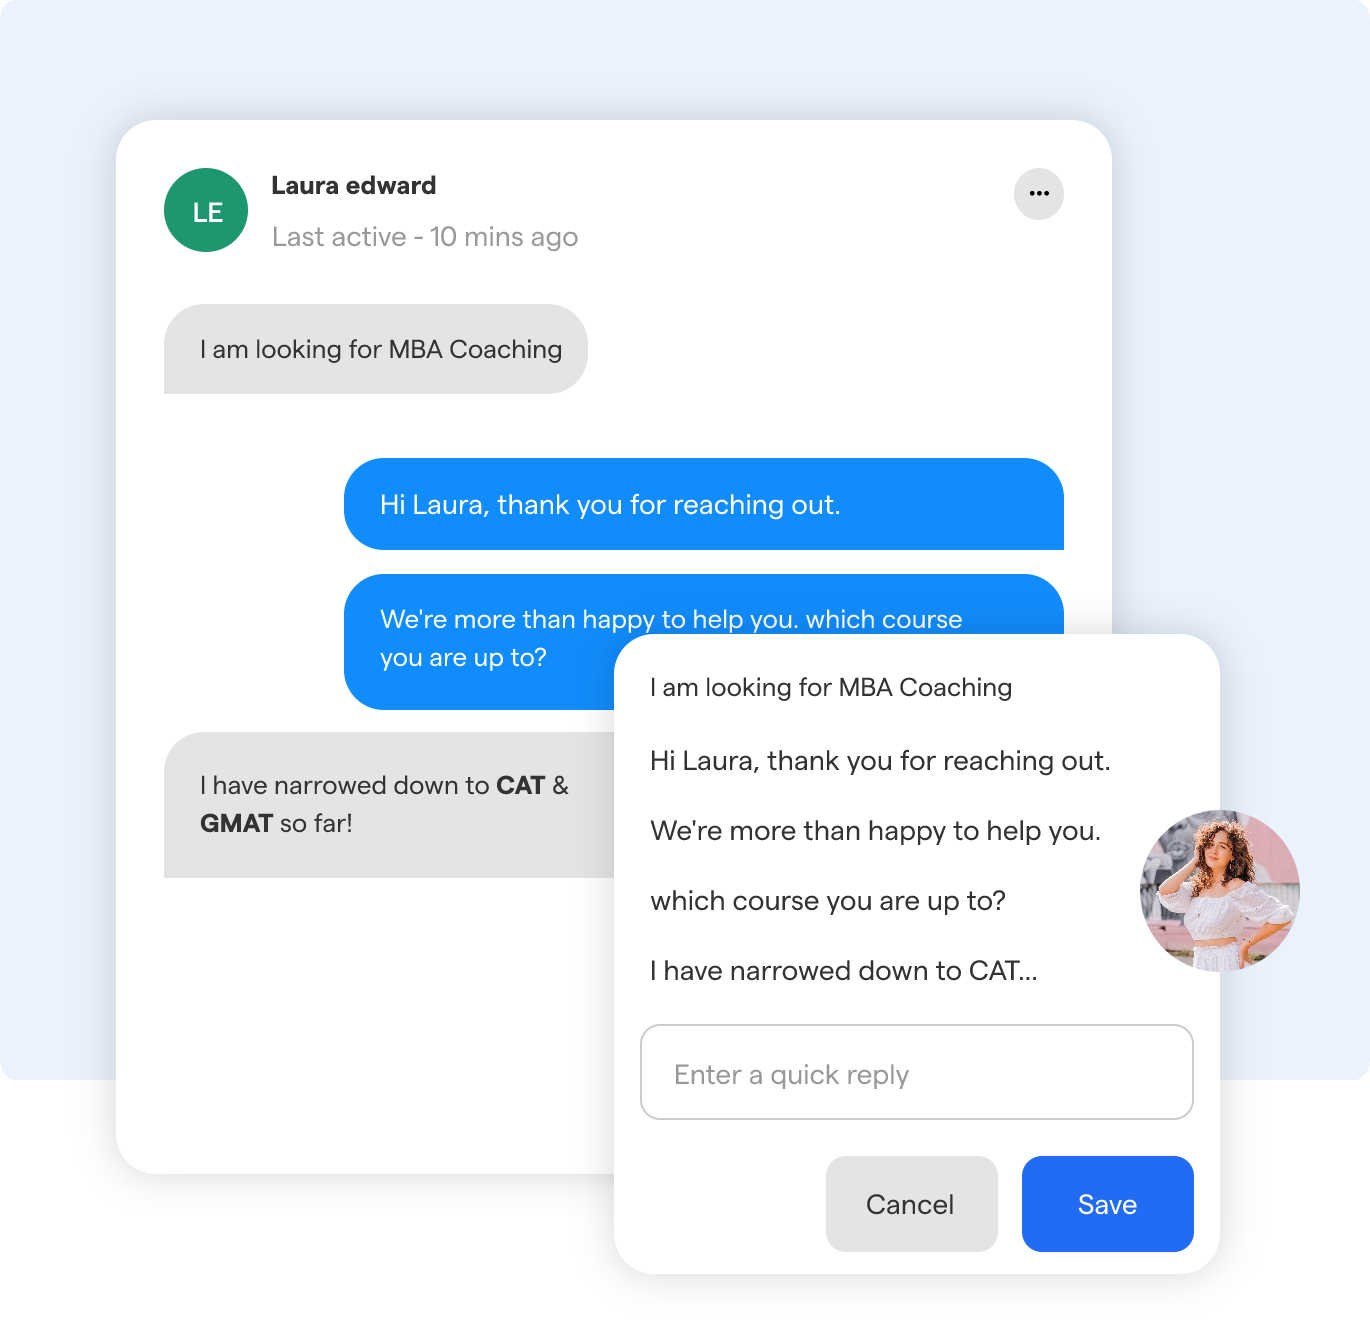 Applications of Education Chatbots